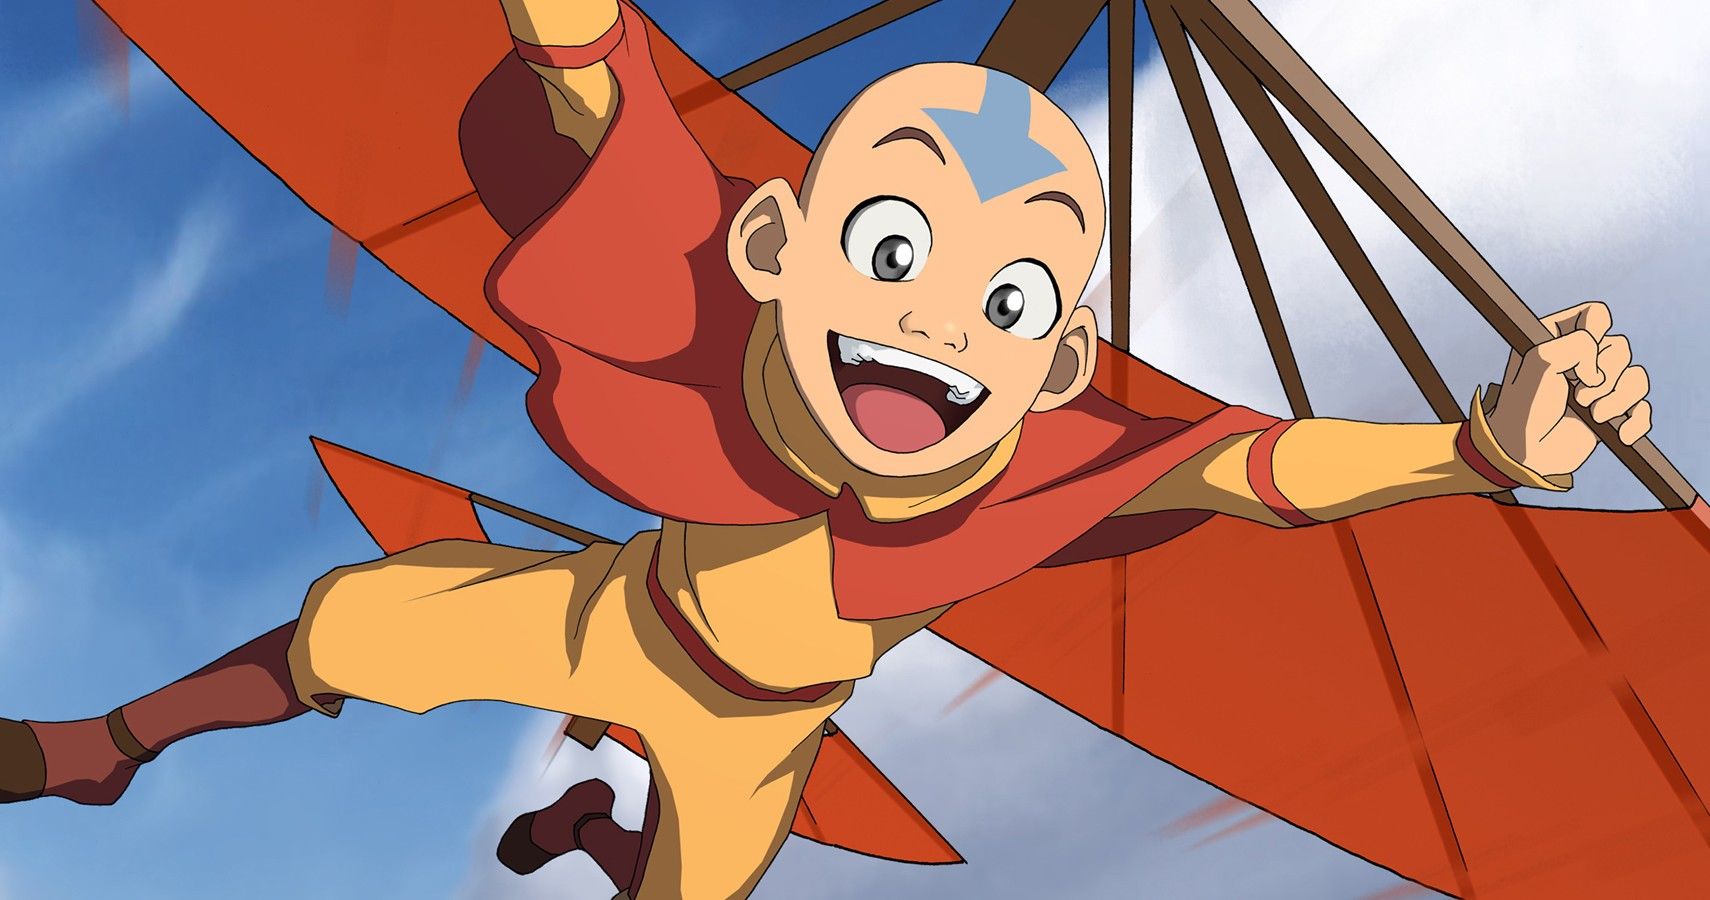 Avatar The Last Airbender On Netflix Reminds Us That We Still Need A Great Avatar Game